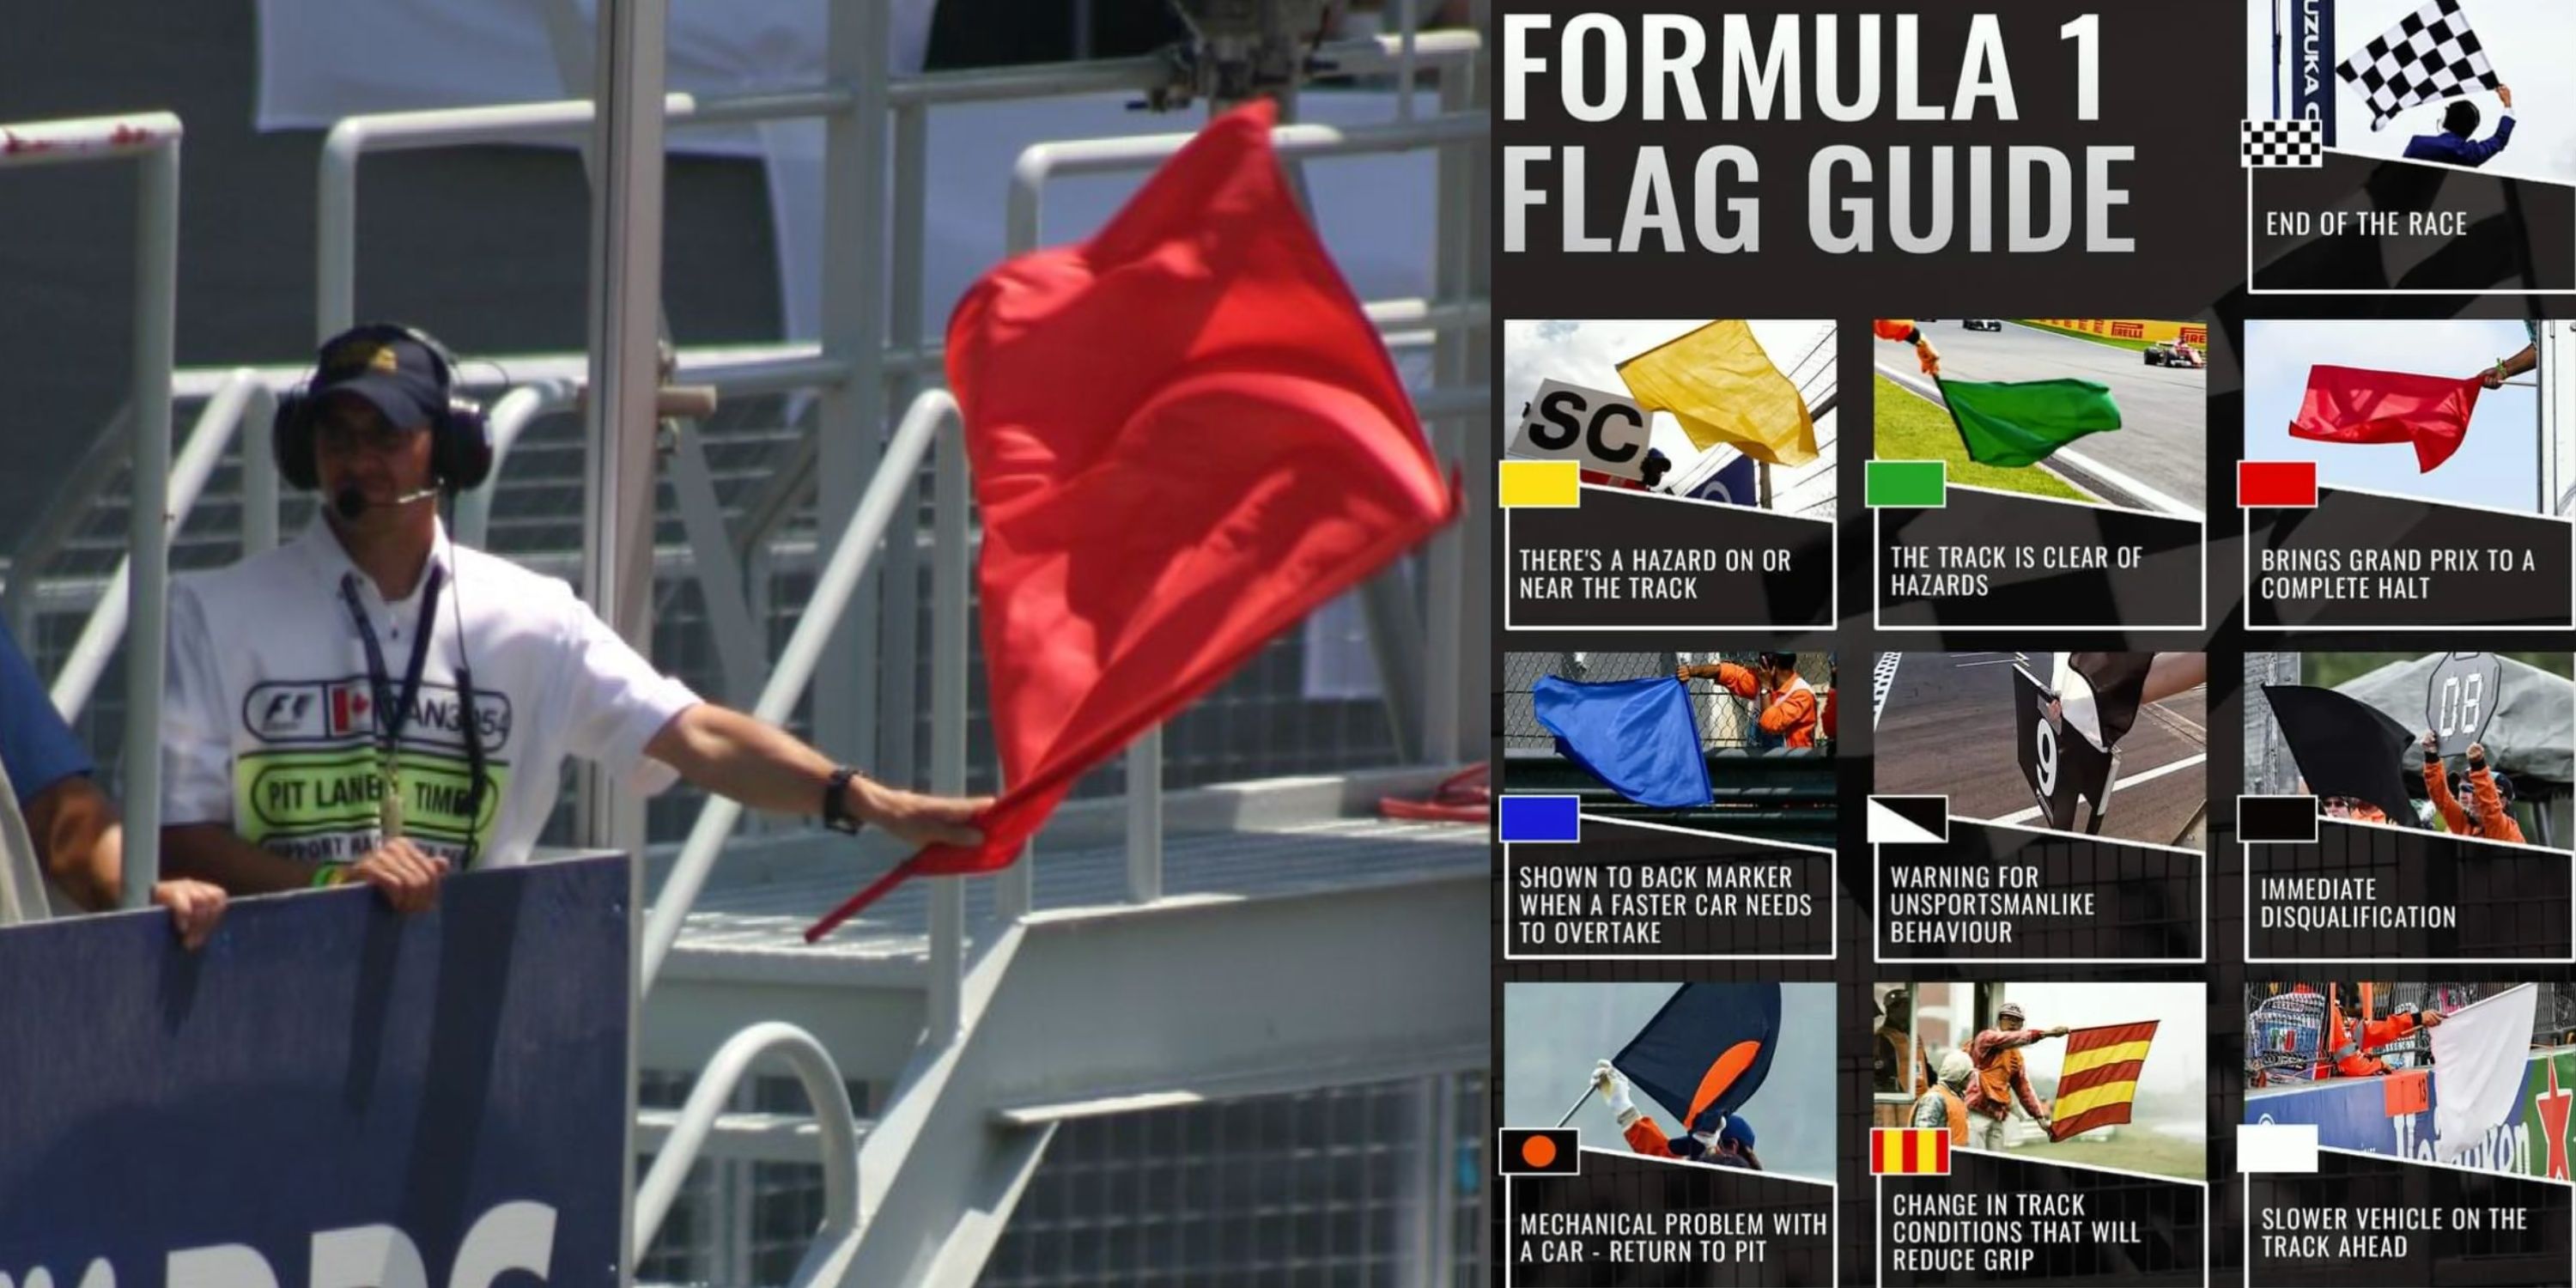 Flags used in F1